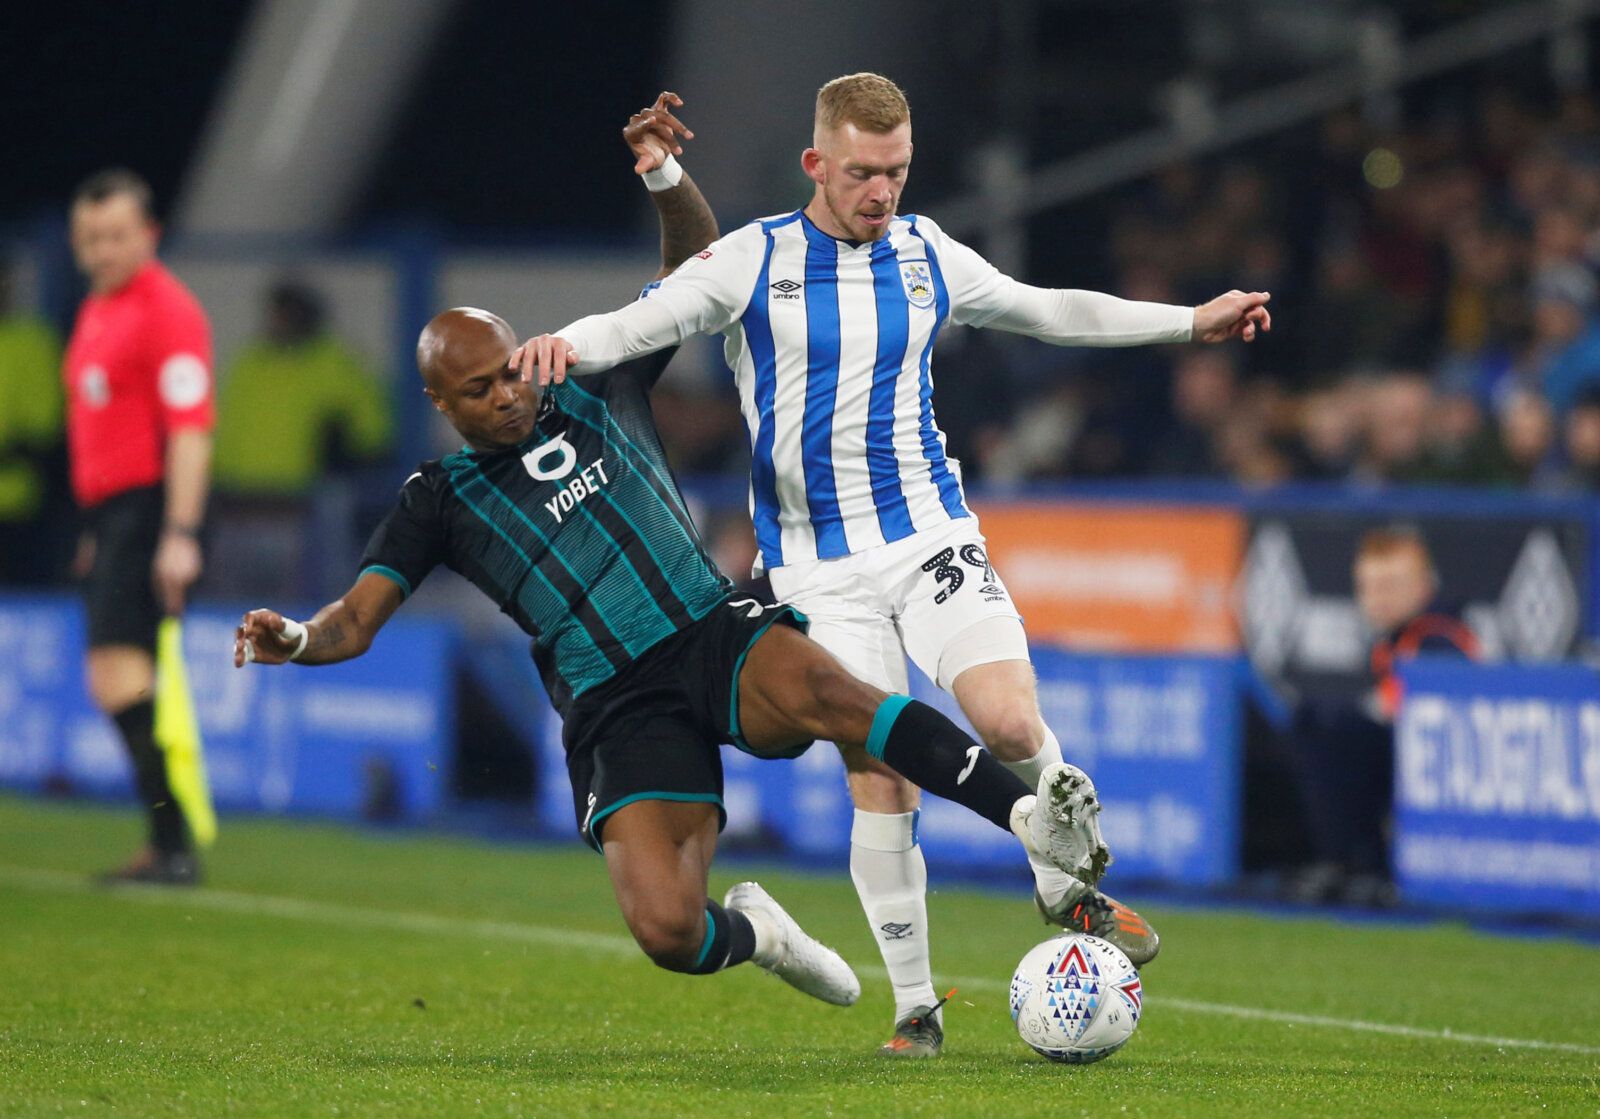 Soccer Football - Championship - Huddersfield Town v Swansea City - John Smith's Stadium, Huddersfield, Britain - November 26, 2019  Huddersfield Town's Lewis O'Brien in action with Swansea City's Andre Ayew  Action Images/Ed Sykes  EDITORIAL USE ONLY. No use with unauthorized audio, video, data, fixture lists, club/league logos or 